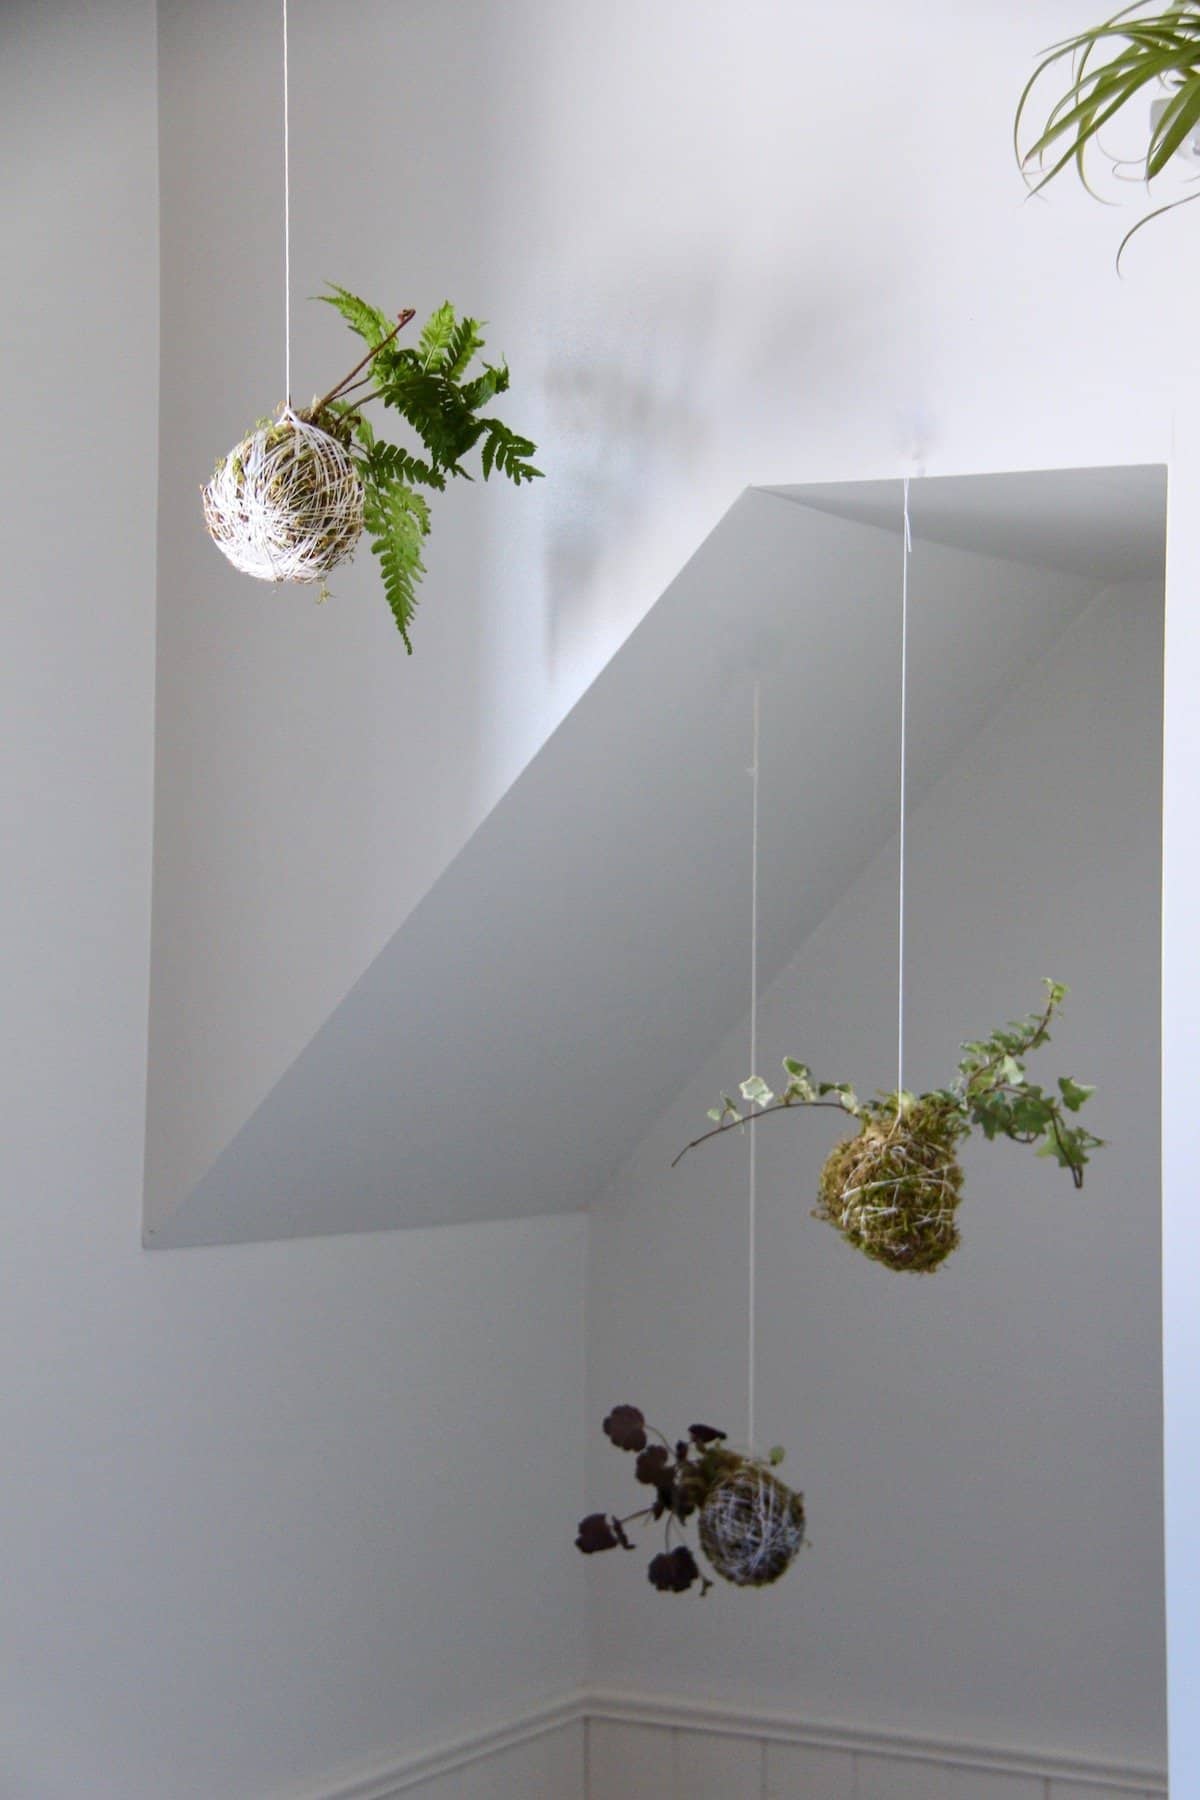 These hanging plants are so fun! This kokedama moss ball is an easy way to bring greenery into your home year-round. #kokedama #mossball #kokedamamossball #stringgarden #moss